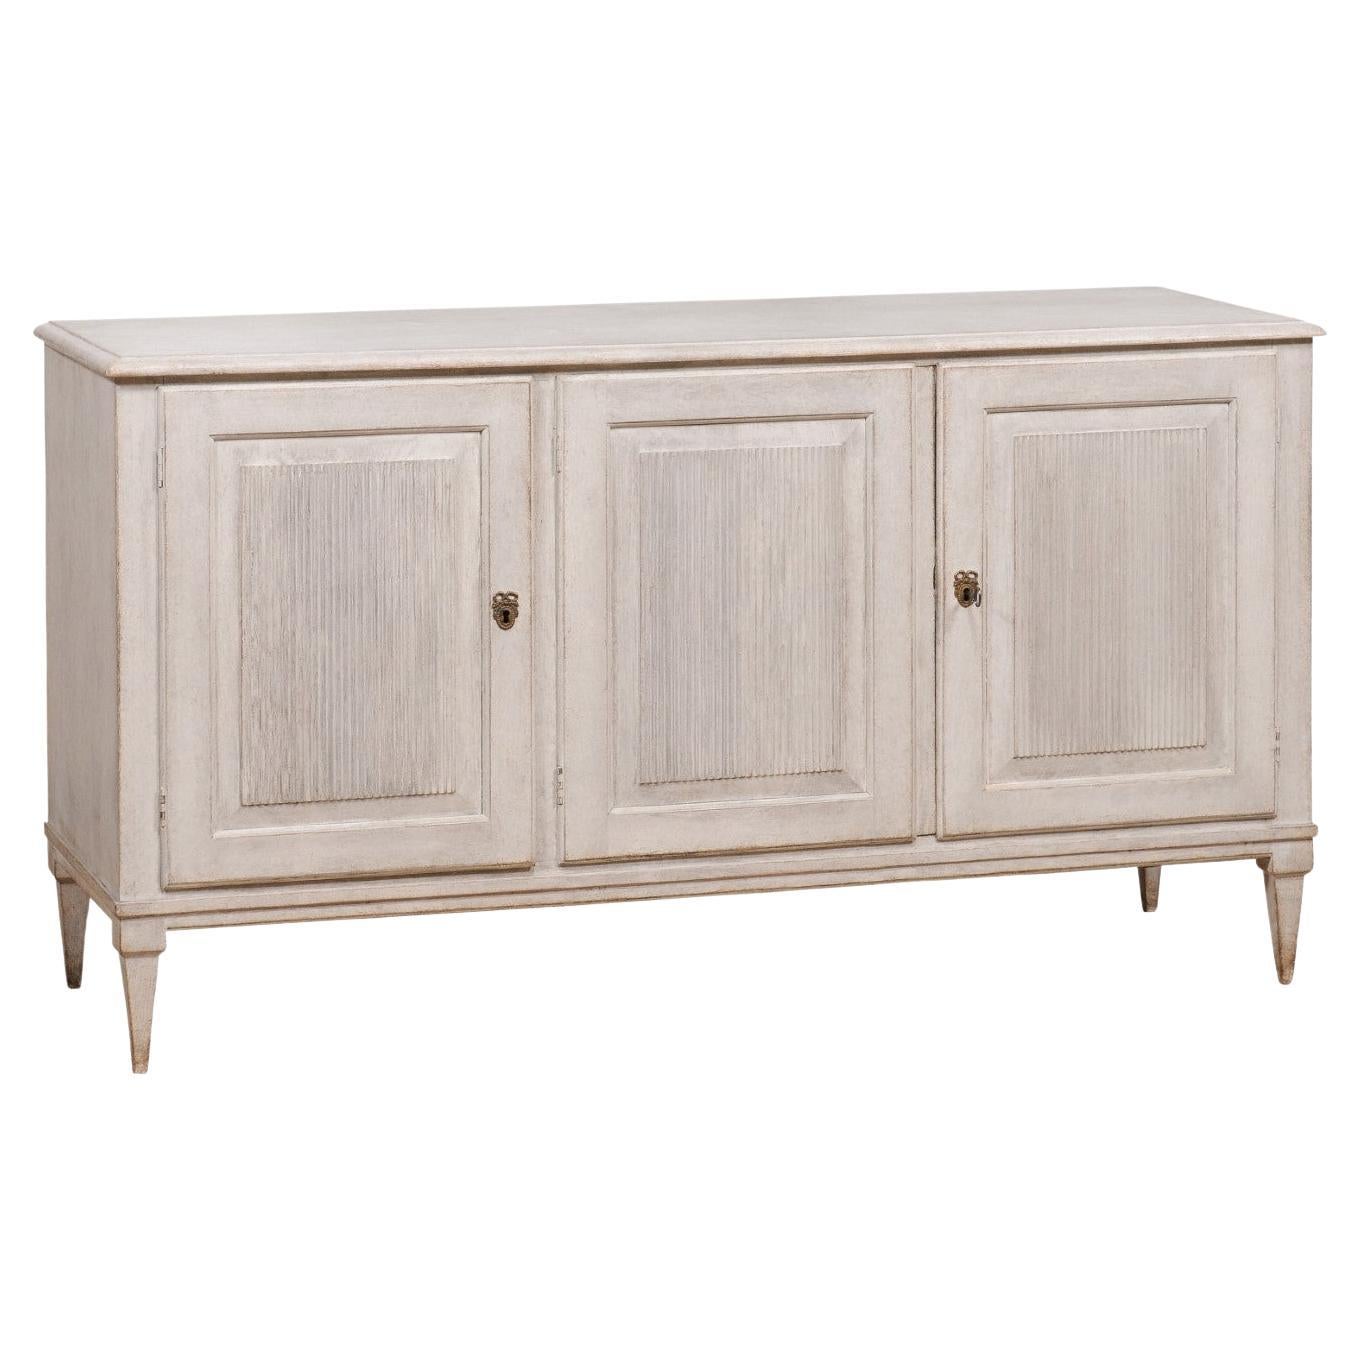 19th Century Gustavian Style Swedish Gray Painted Sideboard with Reeded Panels